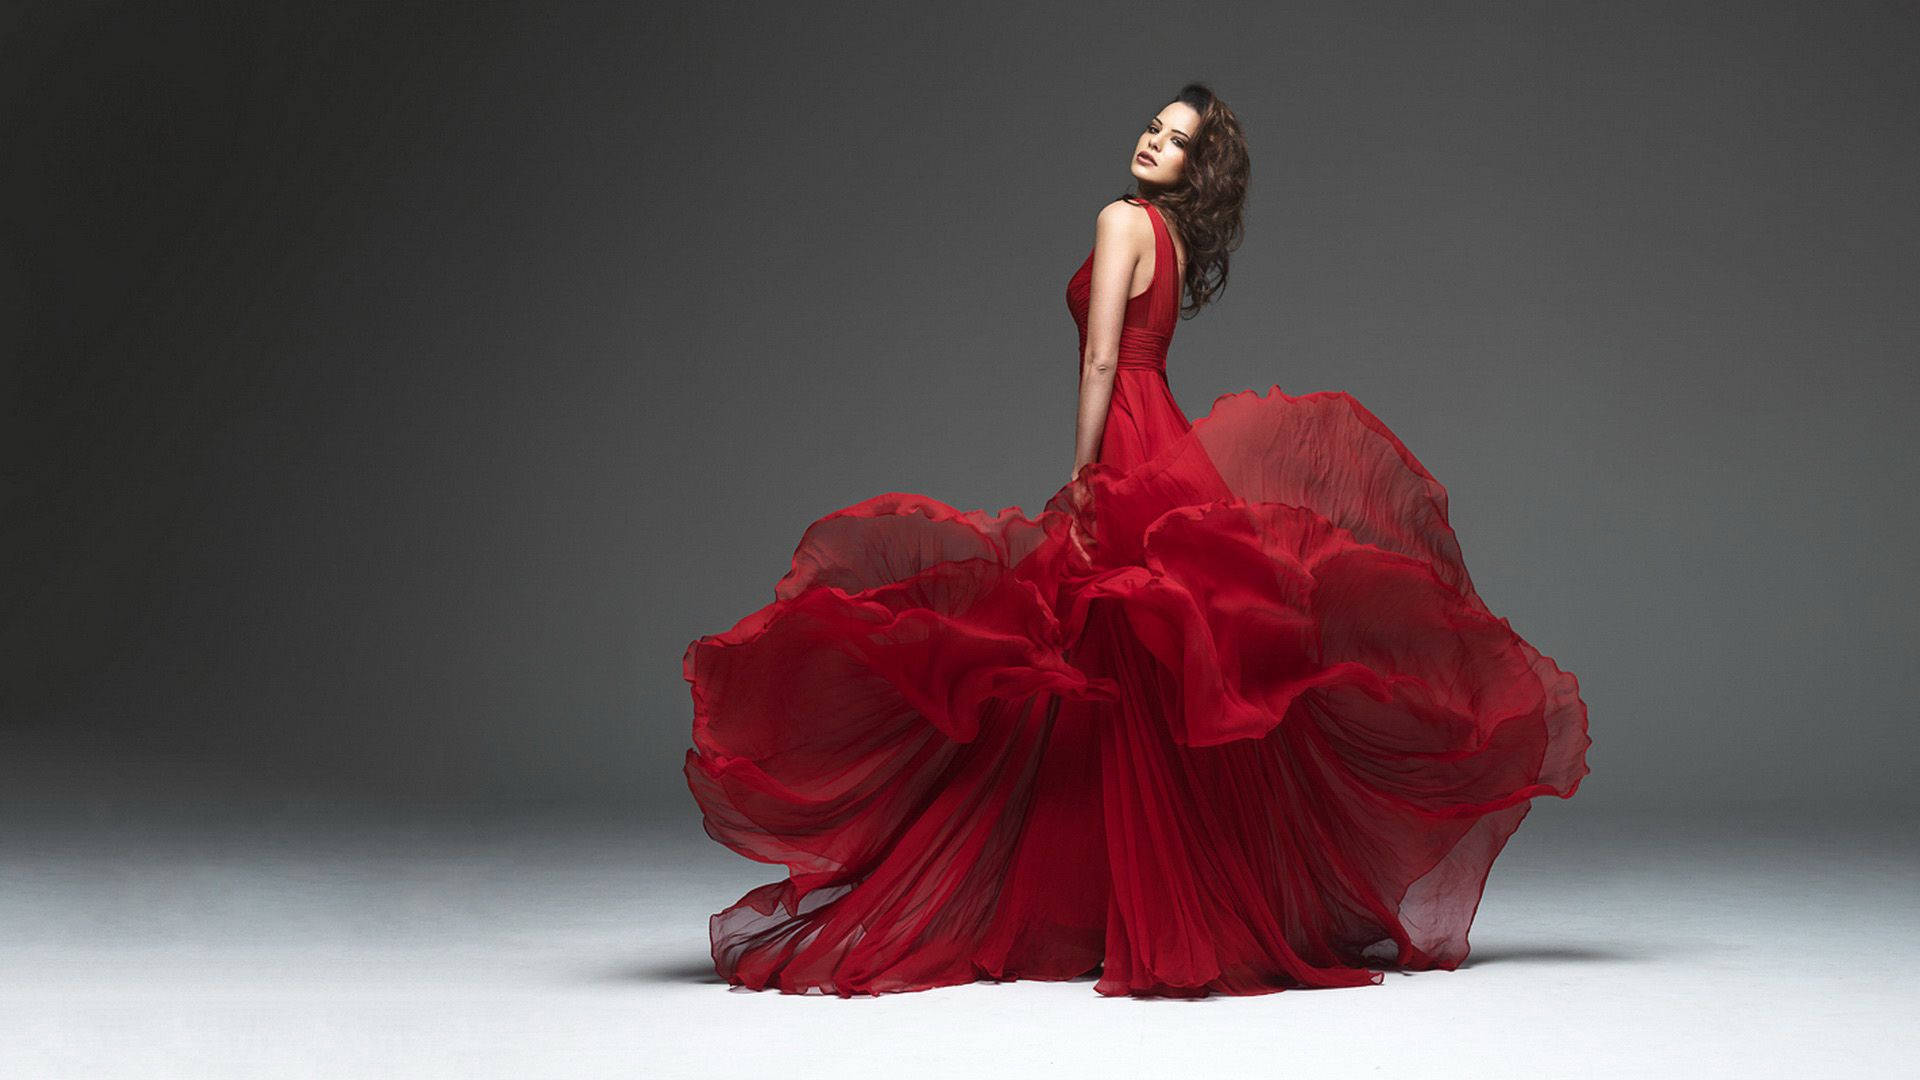 Woman In Red Gown Fashion Model Wallpaper